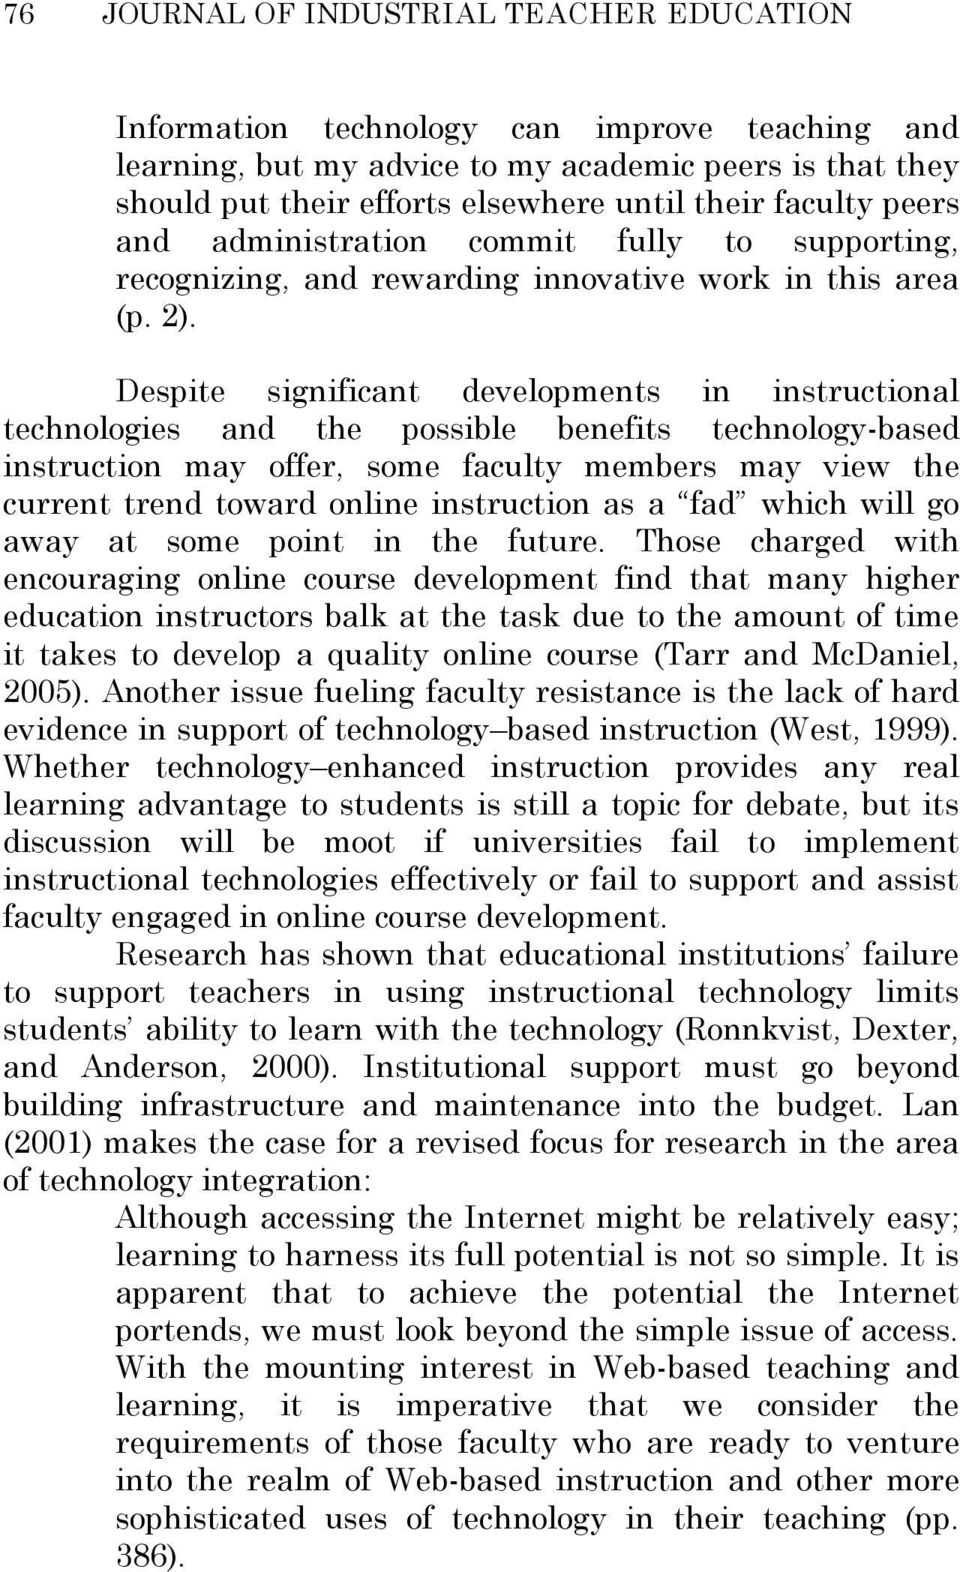 Despite significant developments in instructional technologies and the possible benefits technology-based instruction may offer, some faculty members may view the current trend toward online